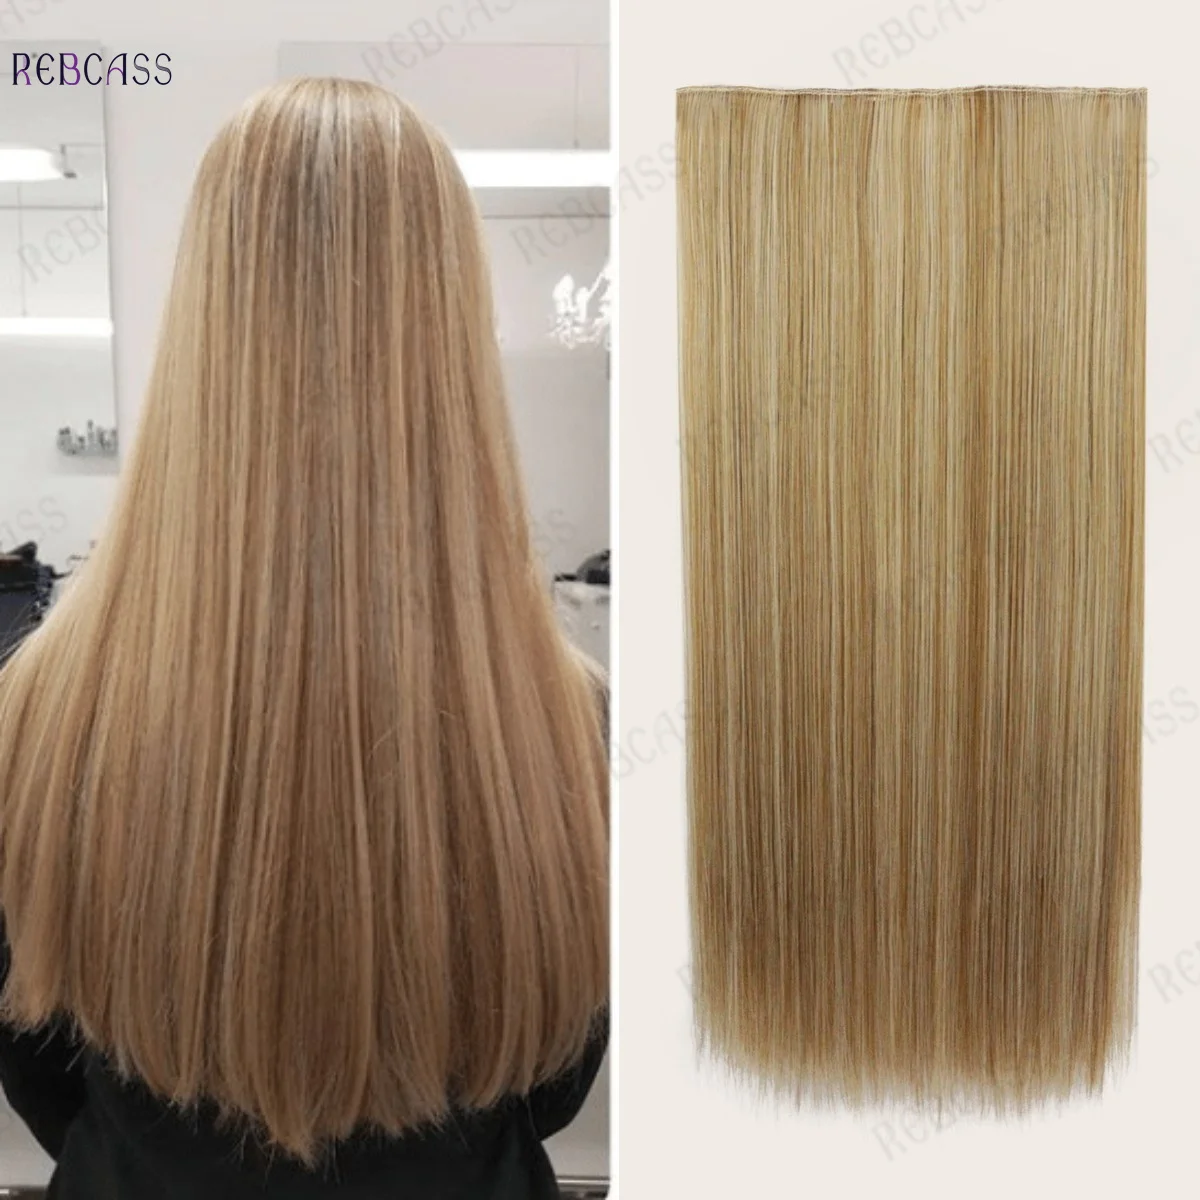 

Rebcass 26Inchs 5 Clips in Hair Extensions Long Straight Hairstyle Synthetic Blonde Hairpieces Heat Resistant False Hair